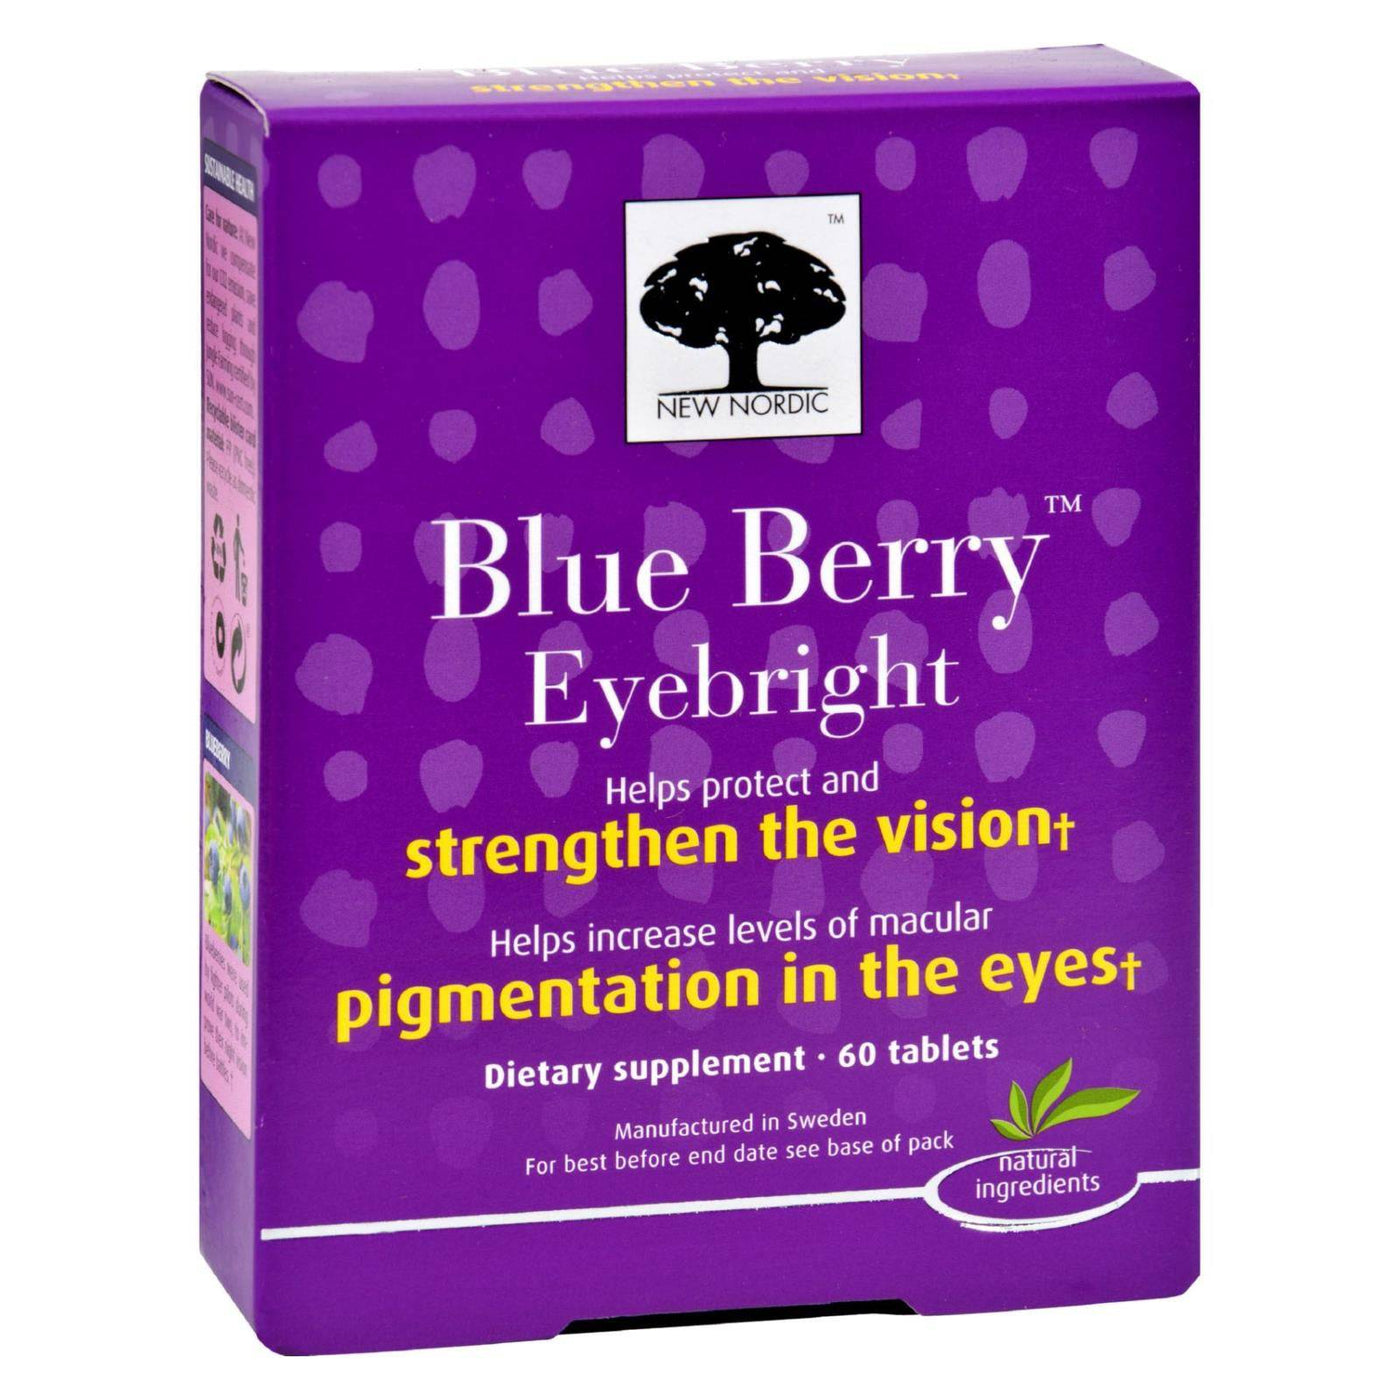 Buy New Nordic Blue Berry Eyebright - 60 Tablets  at OnlyNaturals.us